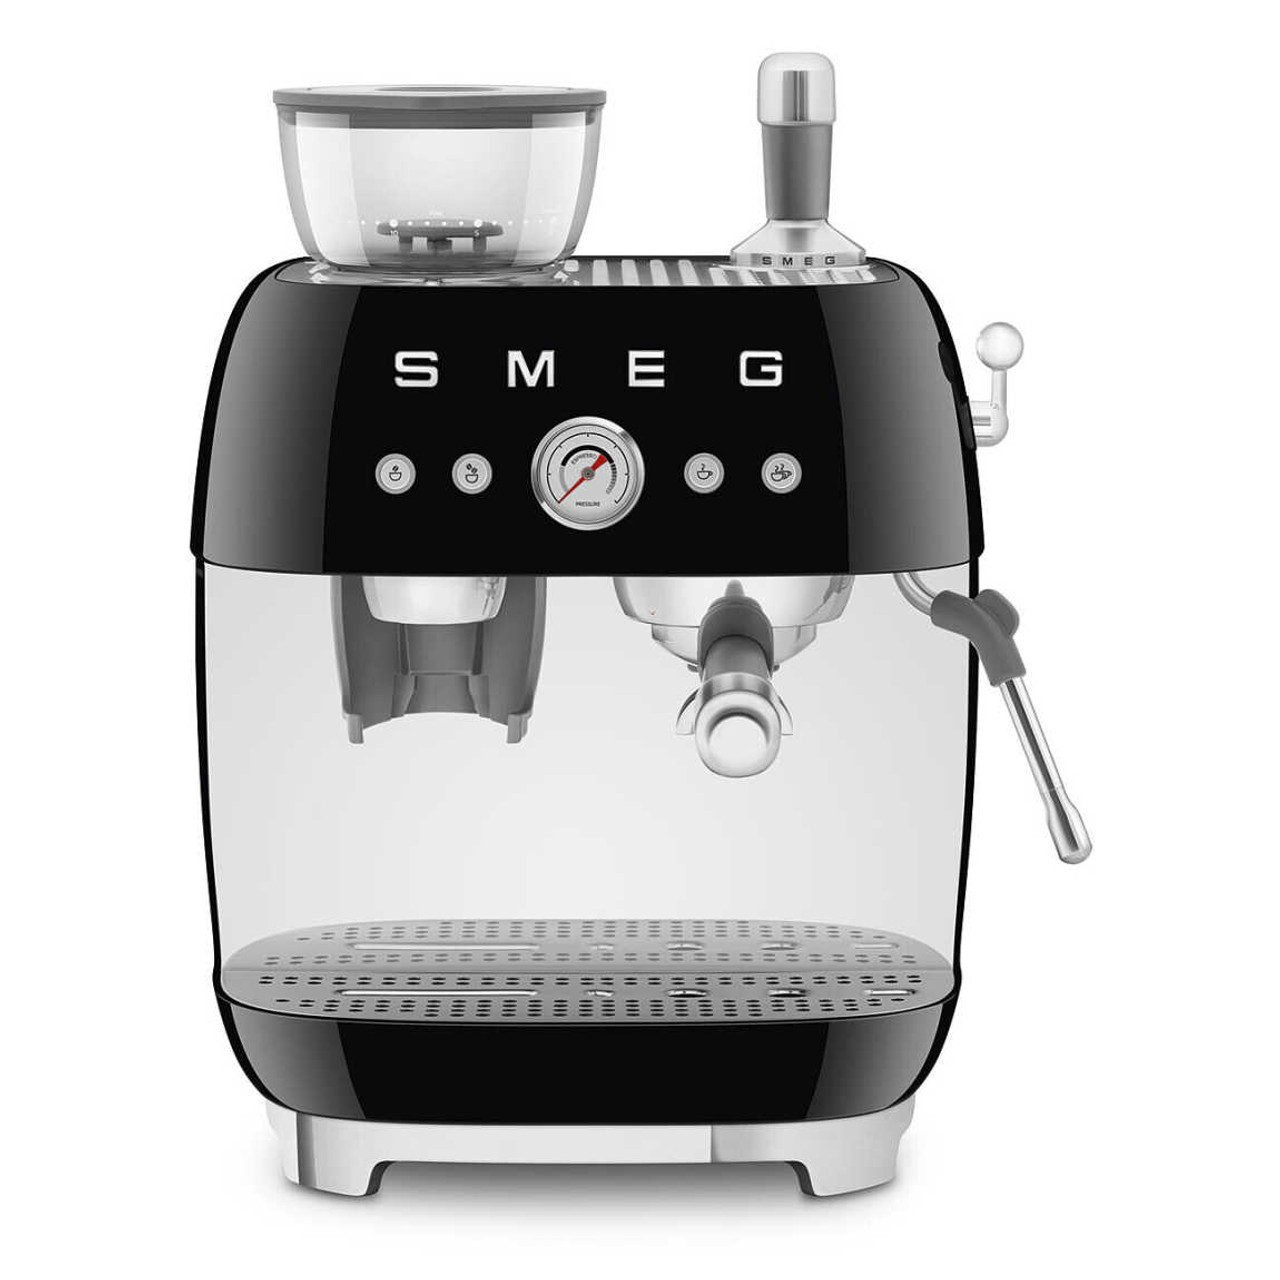 https://cdn11.bigcommerce.com/s-hccytny0od/images/stencil/1280x1280/products/5859/26387/SMEG_Espresso_Machine_and_Grinder_in_Black__91685.1698338655.jpg?c=2?imbypass=on